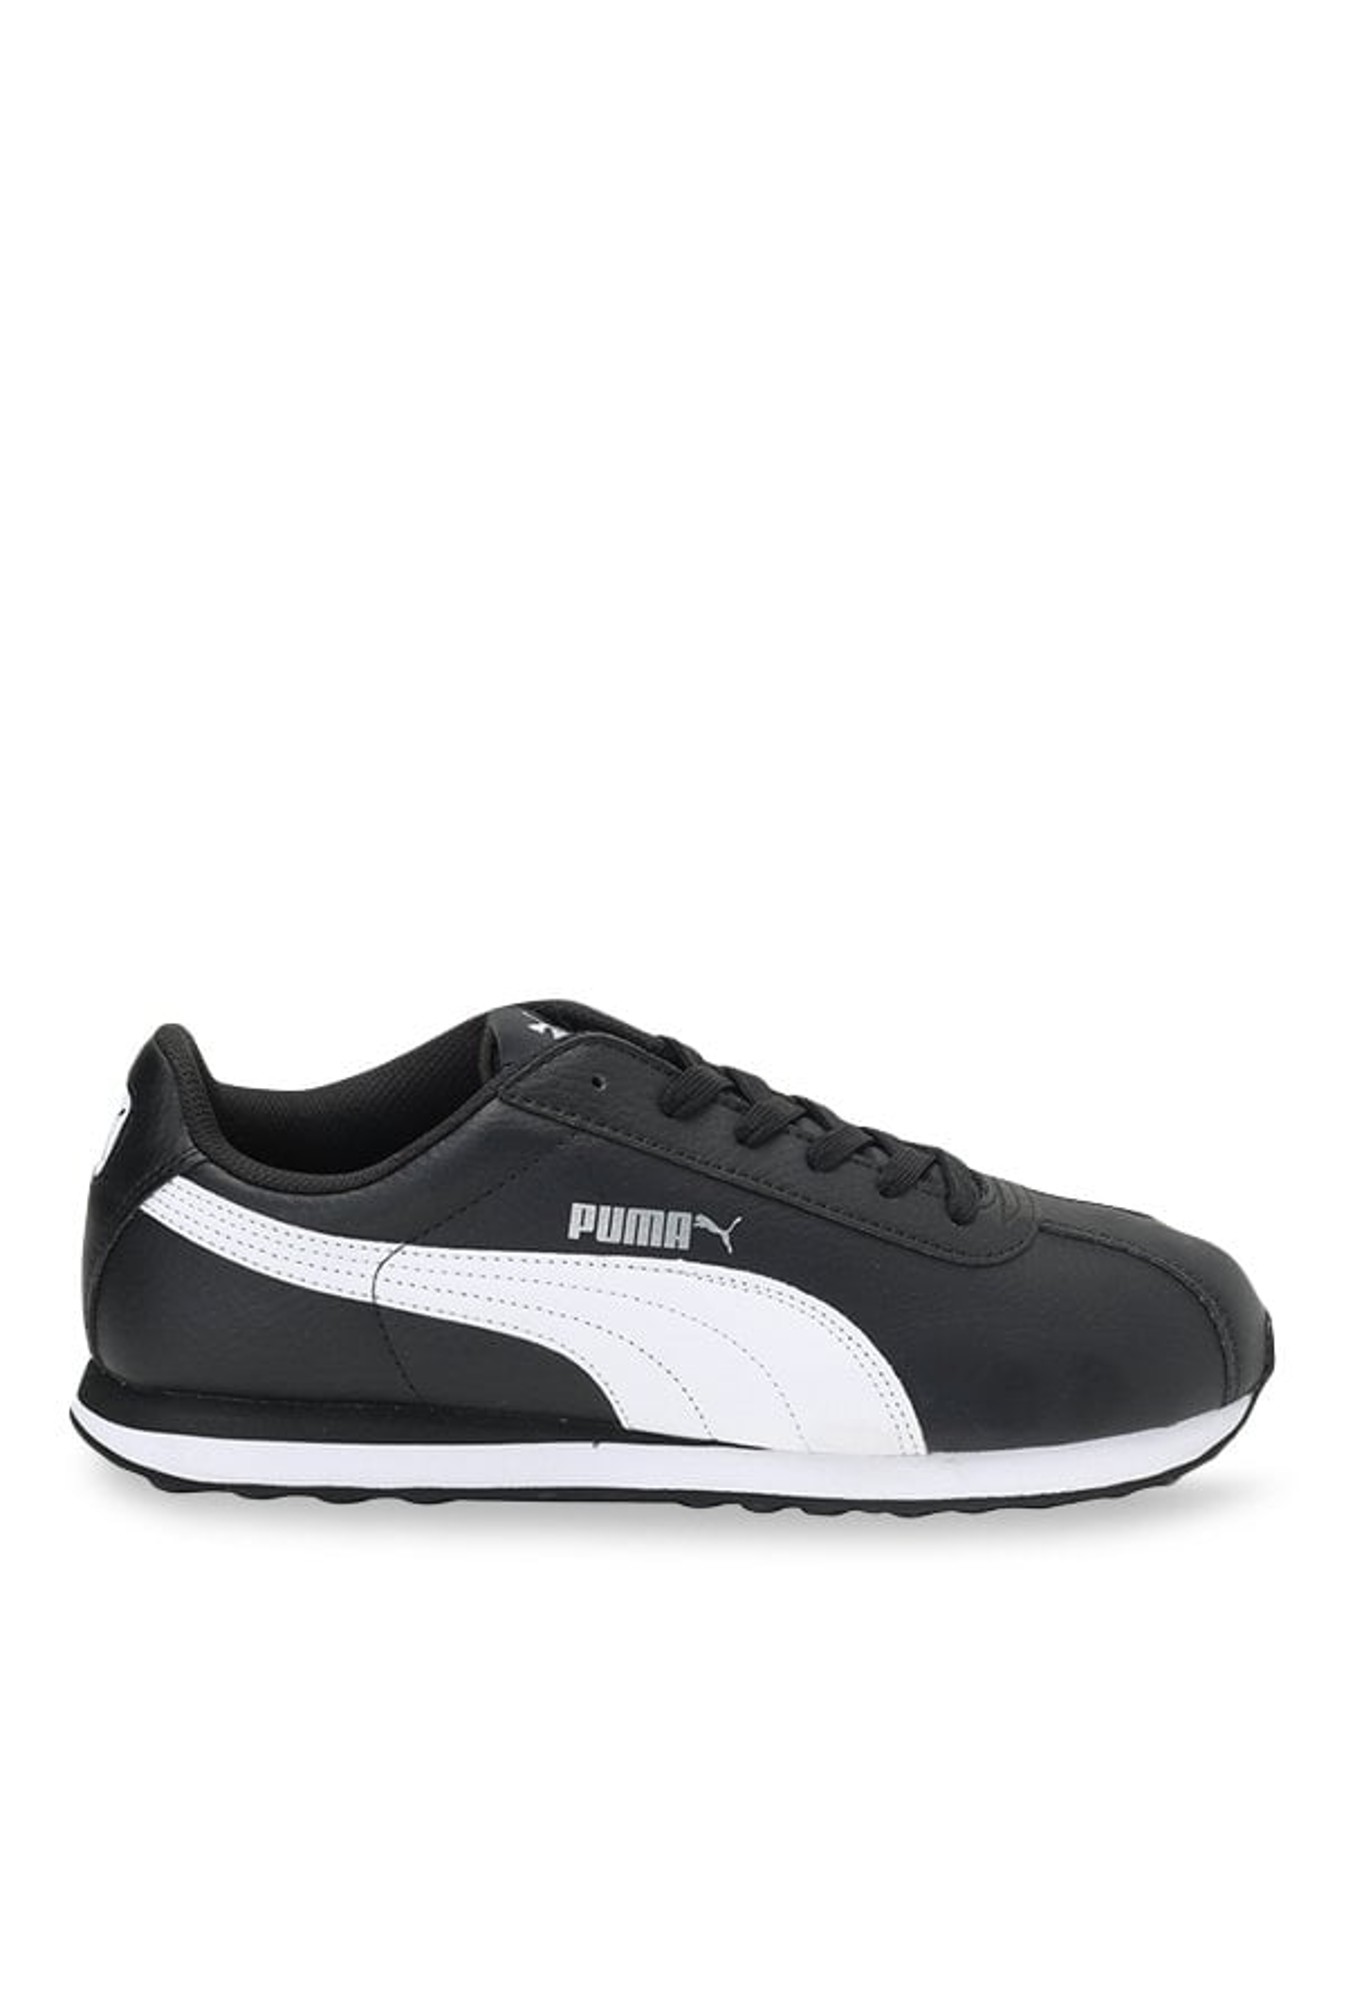 PUMA Turin Black Kids Shoe in Kochi at best price by Shoe Avenue Traders -  Justdial